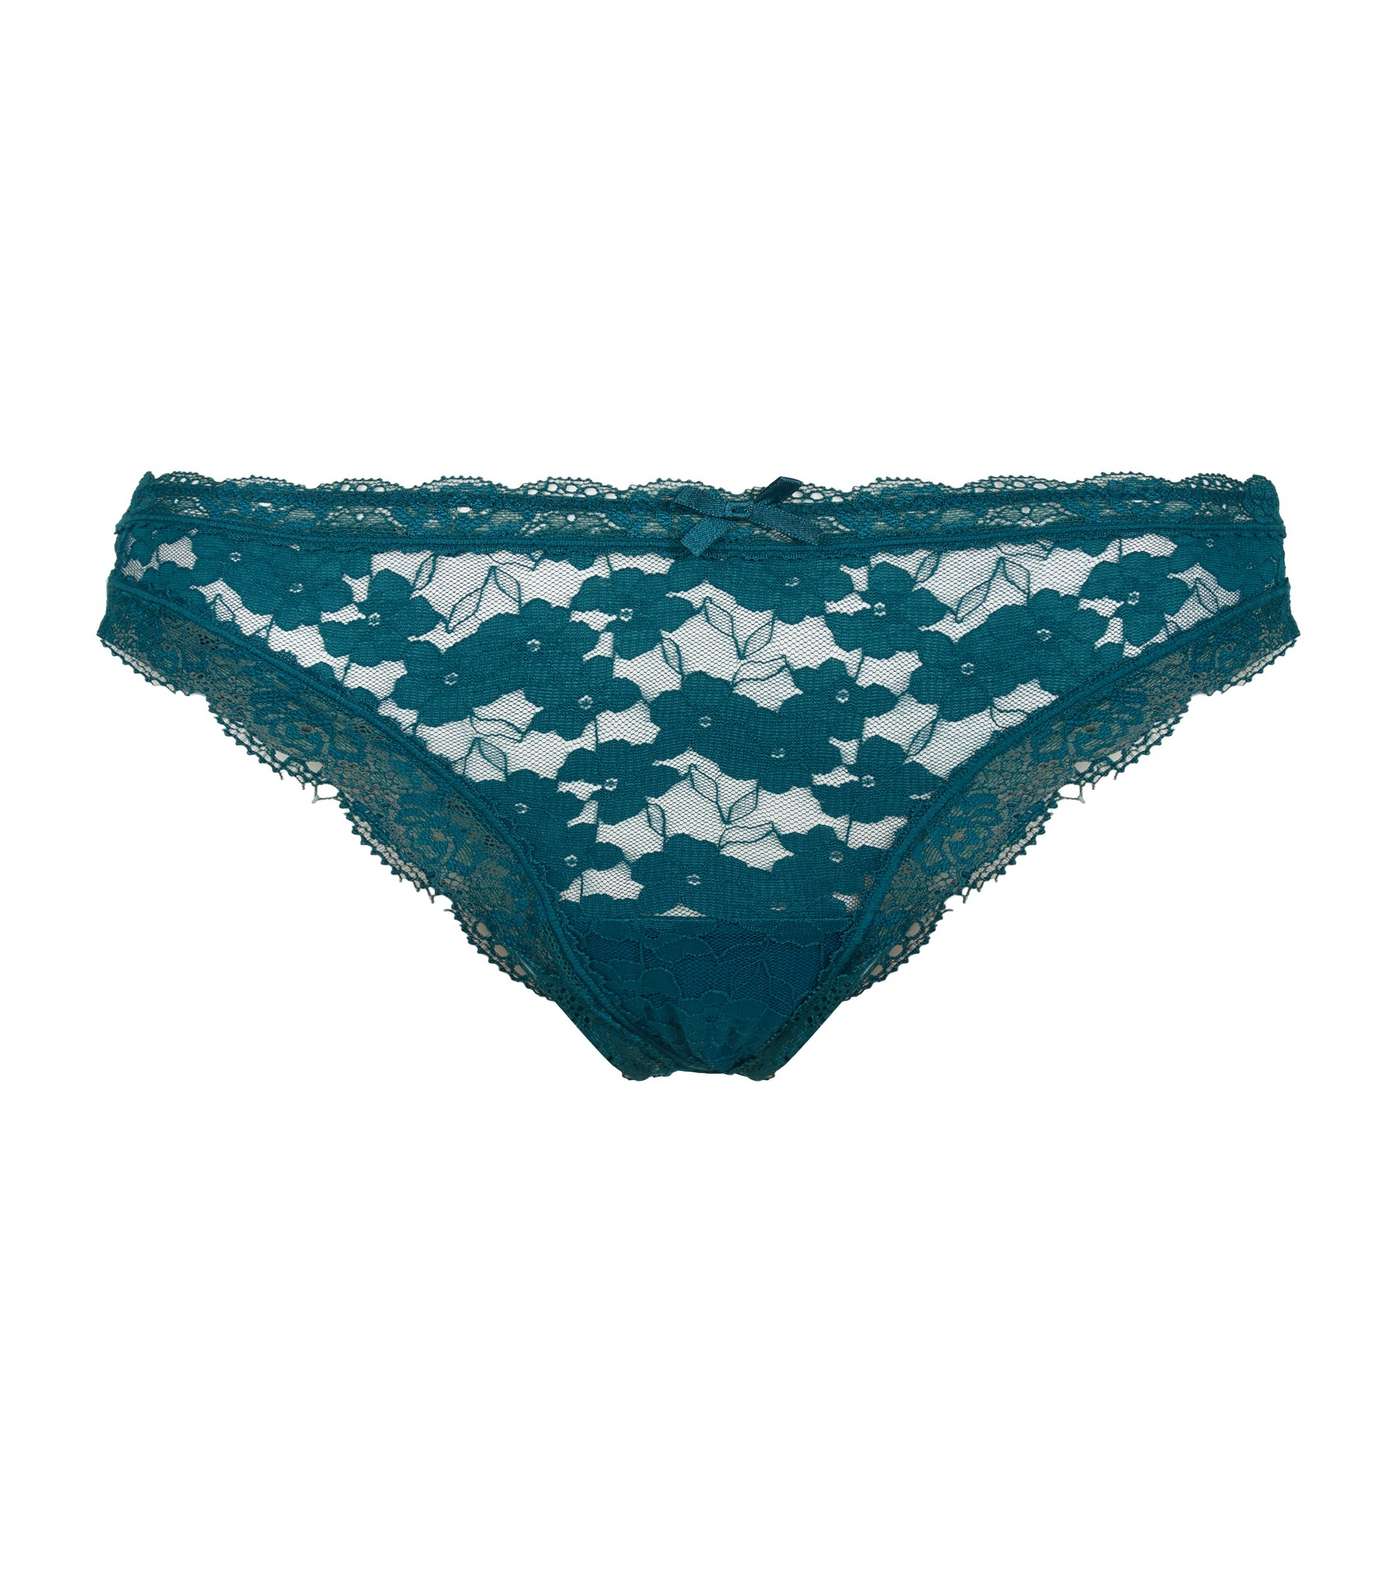 Teal Lace Thong Image 3